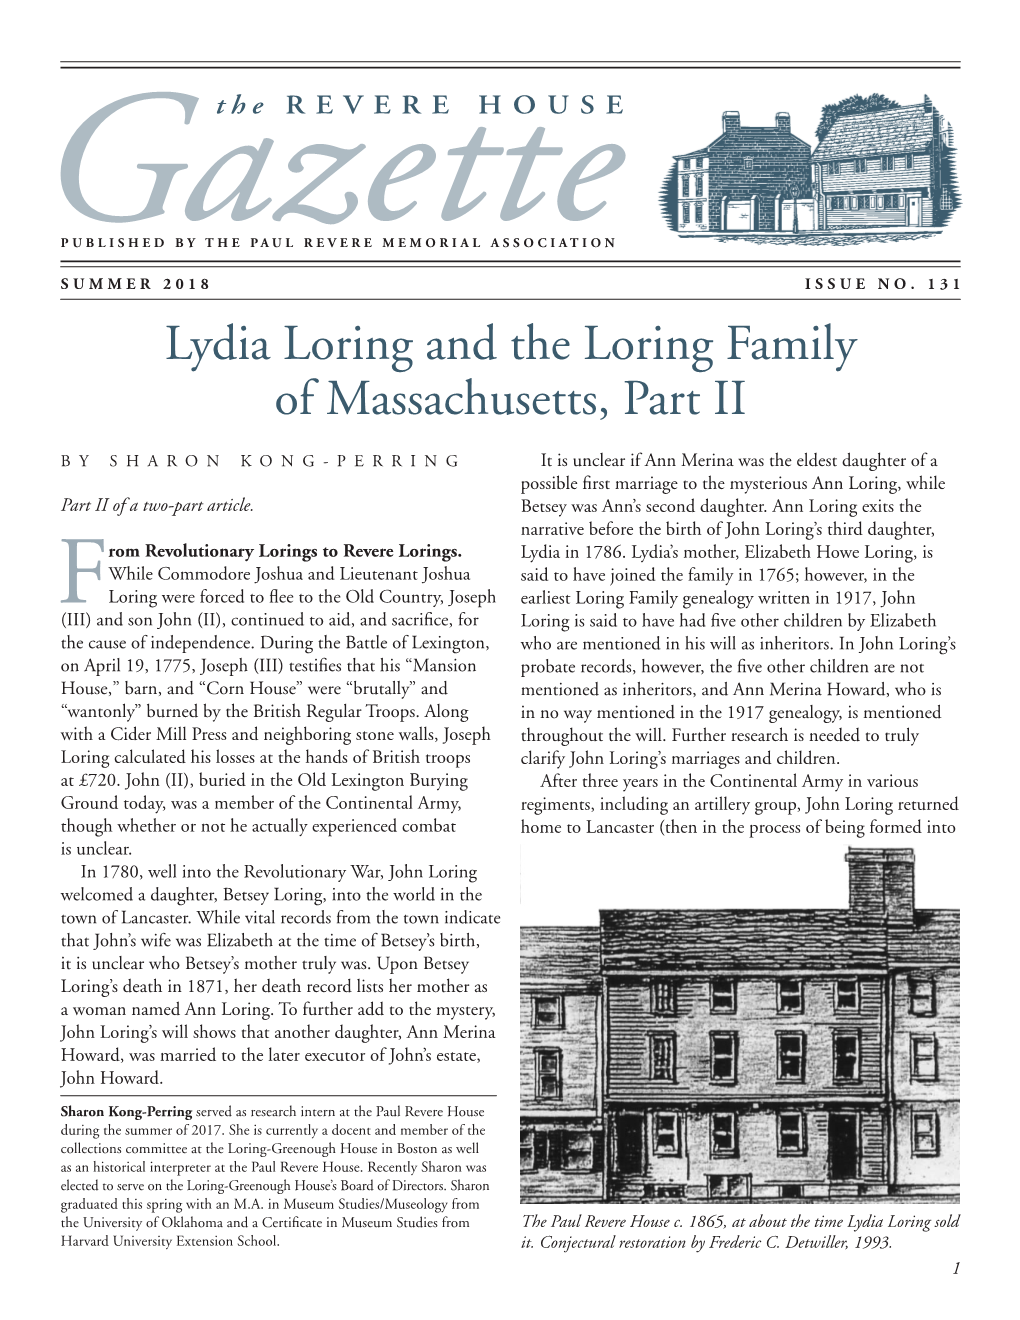 Lydia Loring and the Loring Family of Massachusetts, Part II